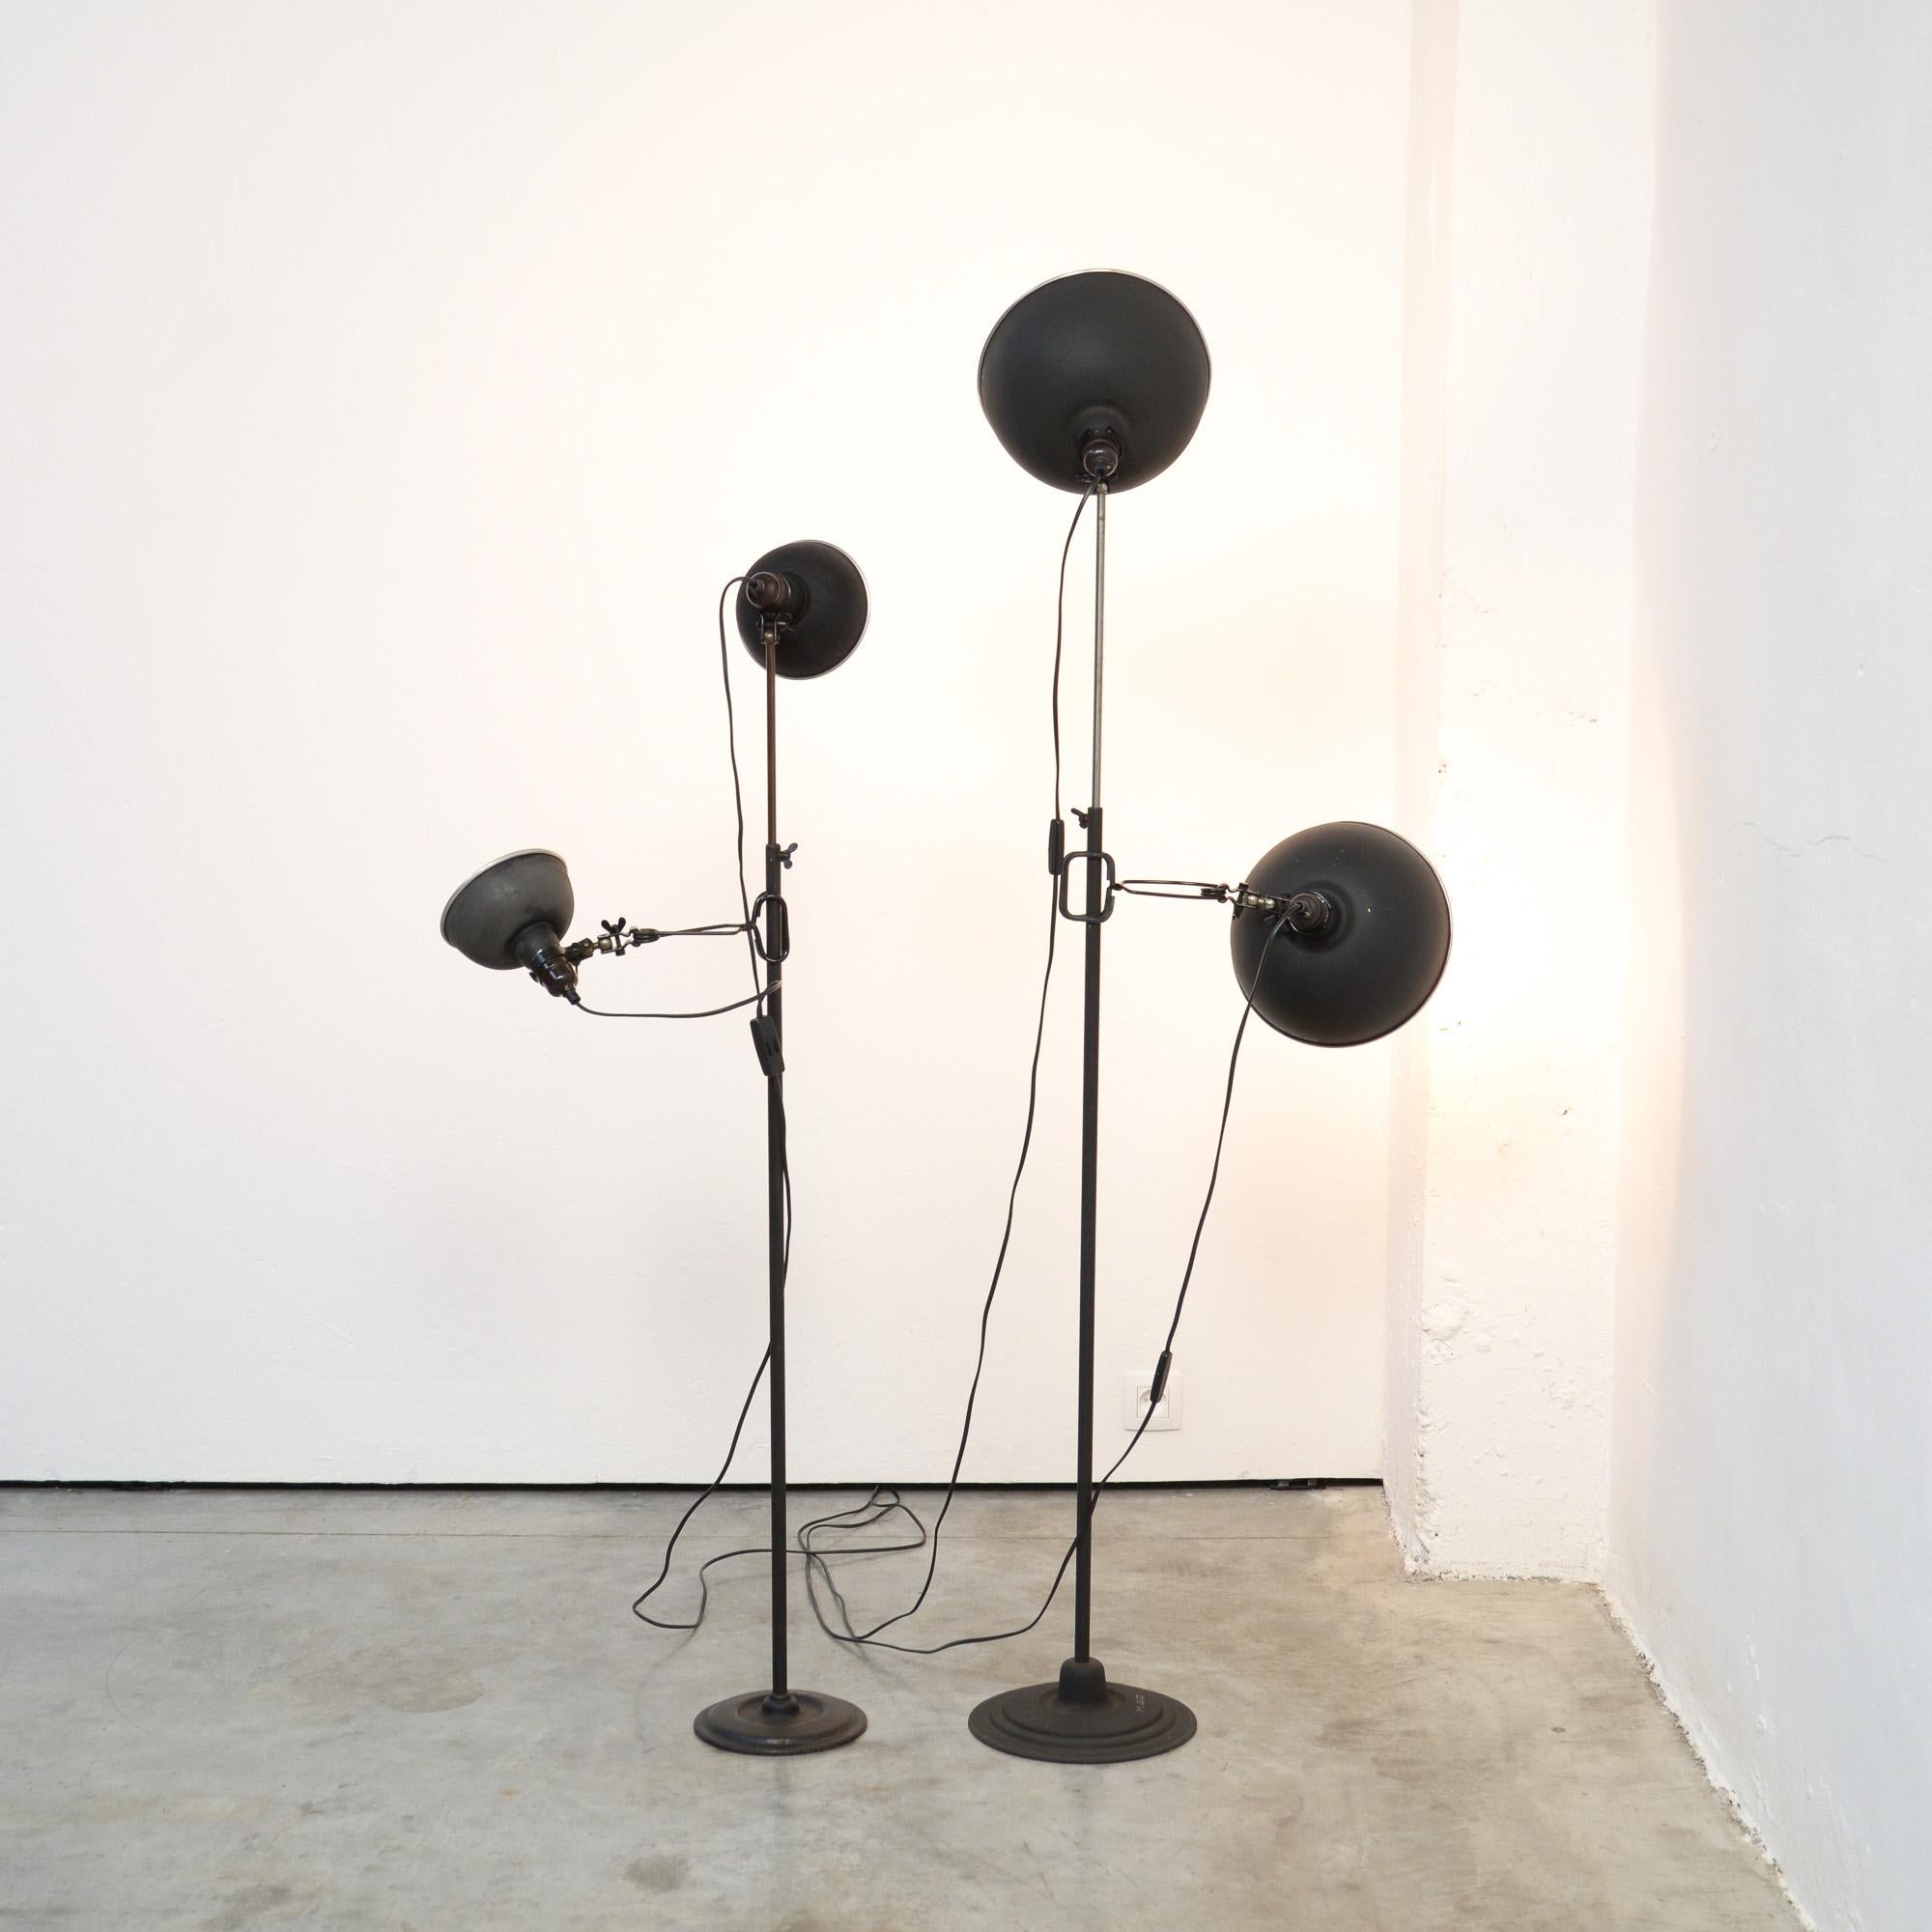 These industrial metal studio lamps were manufactured by KAP in the 1950s. The stems are adjustable in height and the lampshades can be turned.
There are 2 separate clip lamps that can be put on the black stems. The shade have a diameter of 26 cm